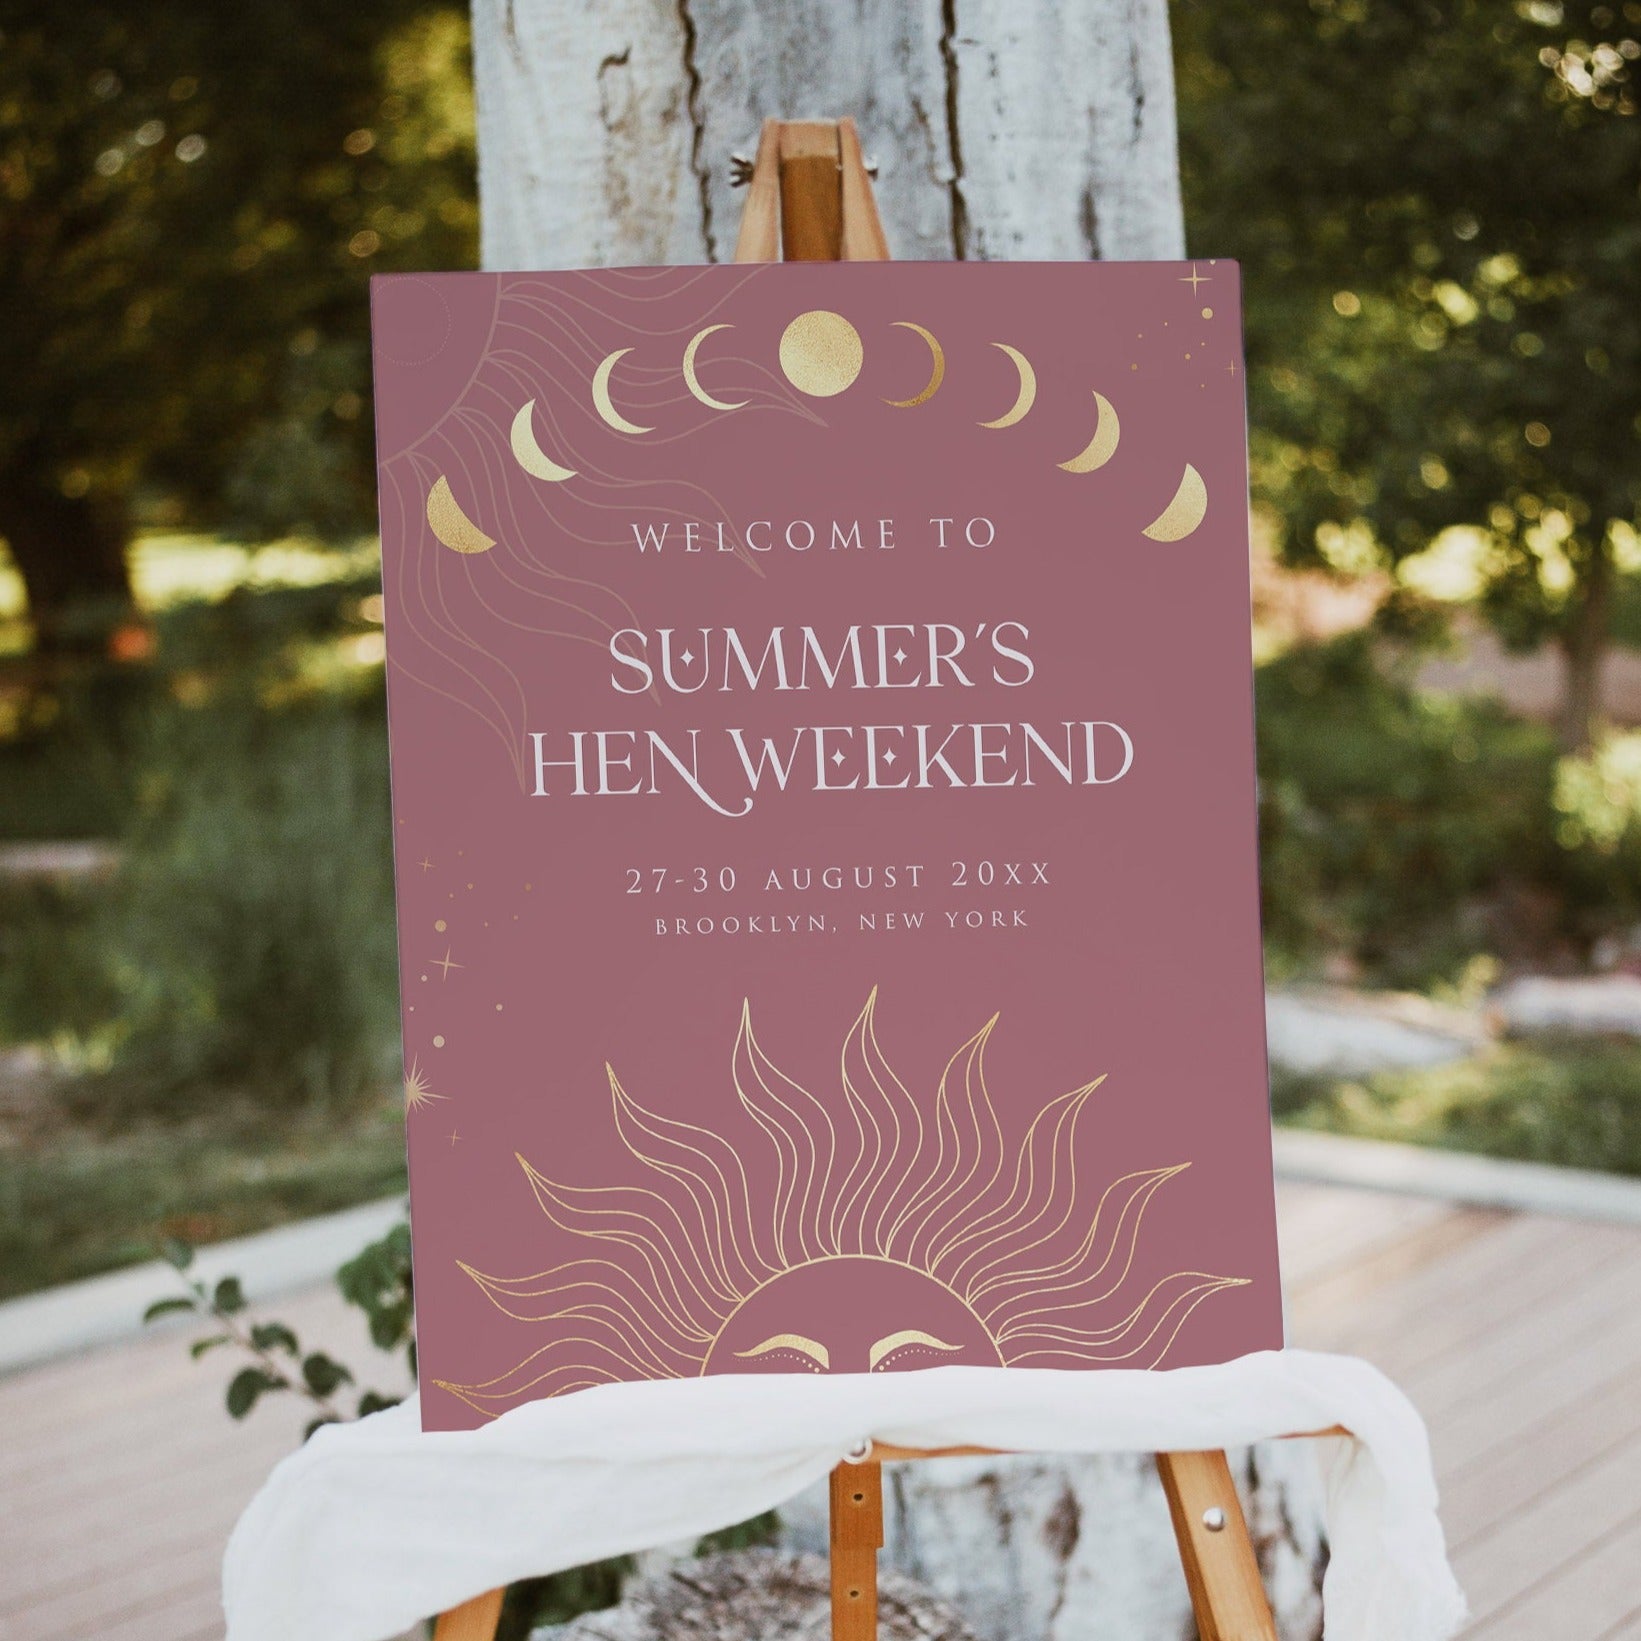 Fully editable and printable hen party weekend welcome sign with a celestial design. Perfect for a celestial bridal shower themed party